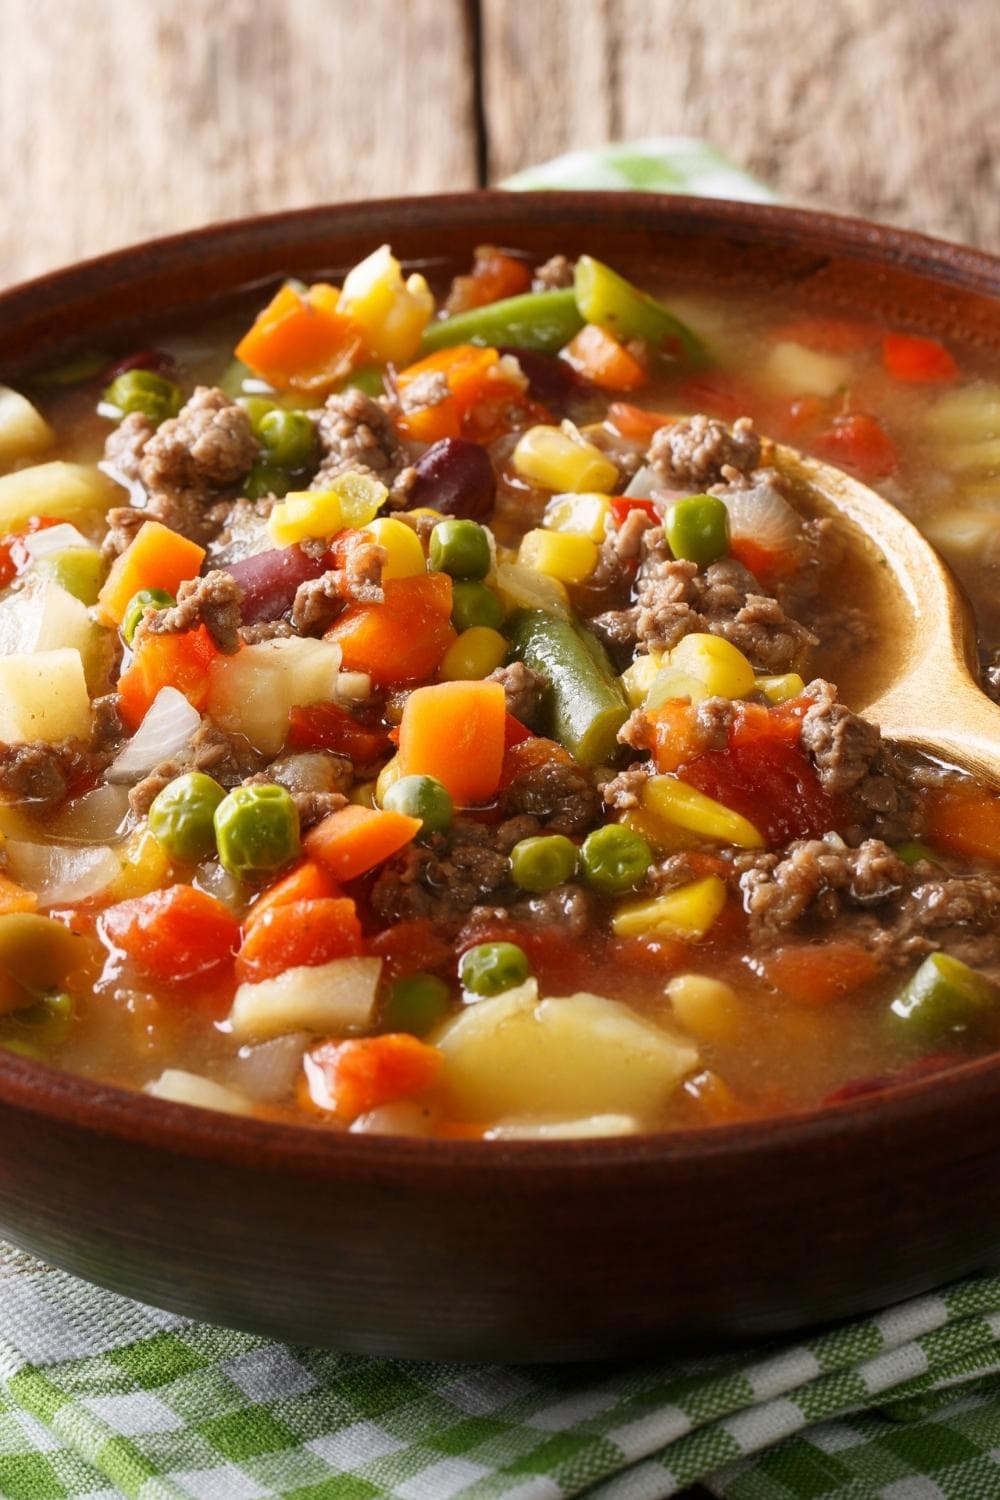 Old-fashioned Vegetable Beef Soup with Beef, Tomatoes, Peas, Carrots, Potatoes, Onions,  and Green Beans in a Bowl with a Wooden Spoon